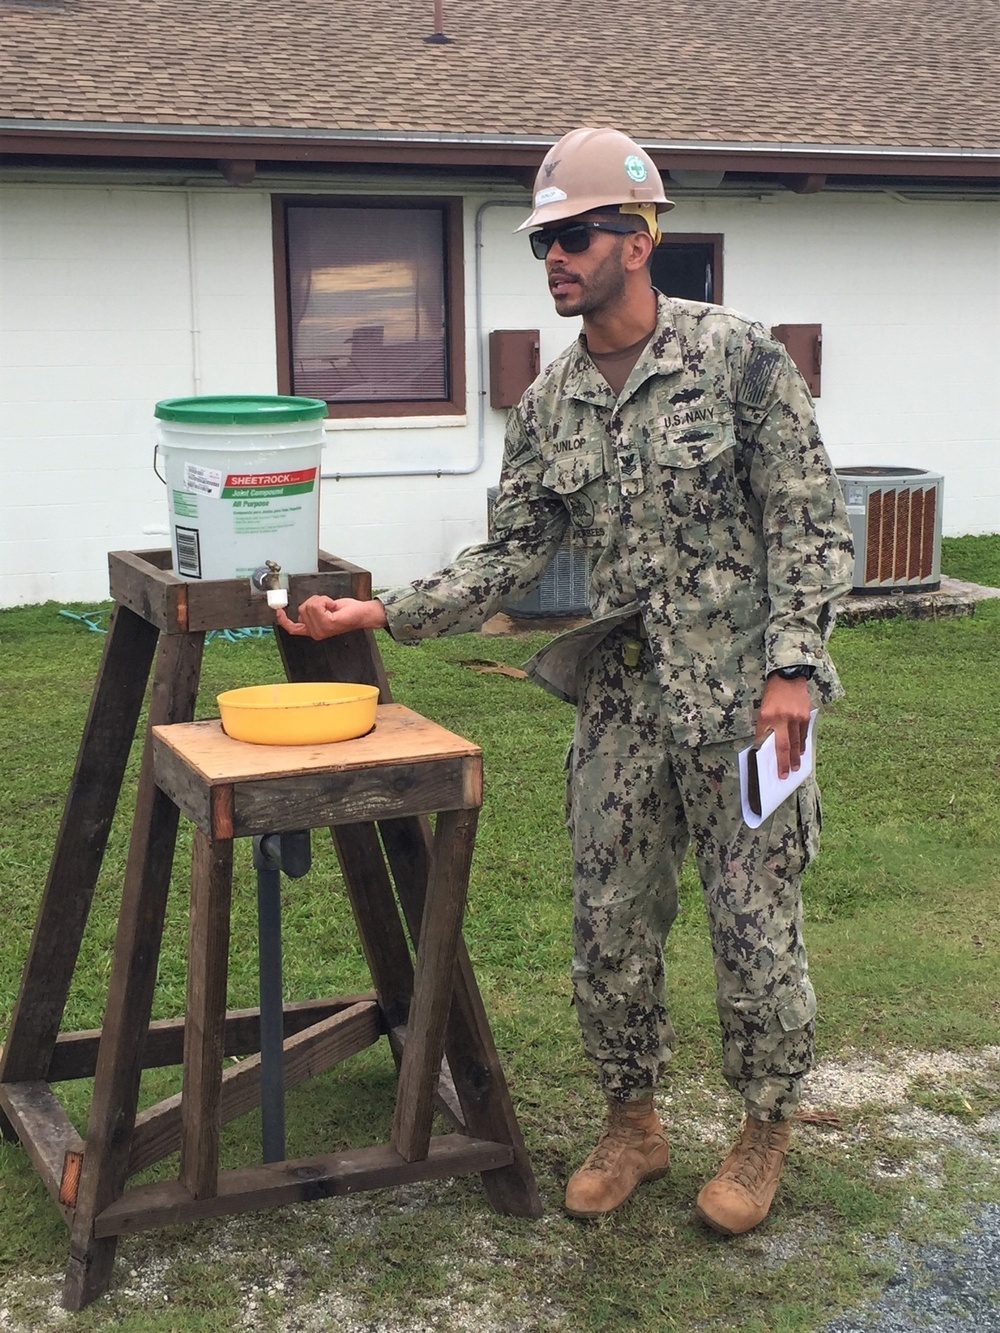 U.S. Navy Seabees with NMCB-5 build hand-washing station prototype to support COVID-19 response efforts